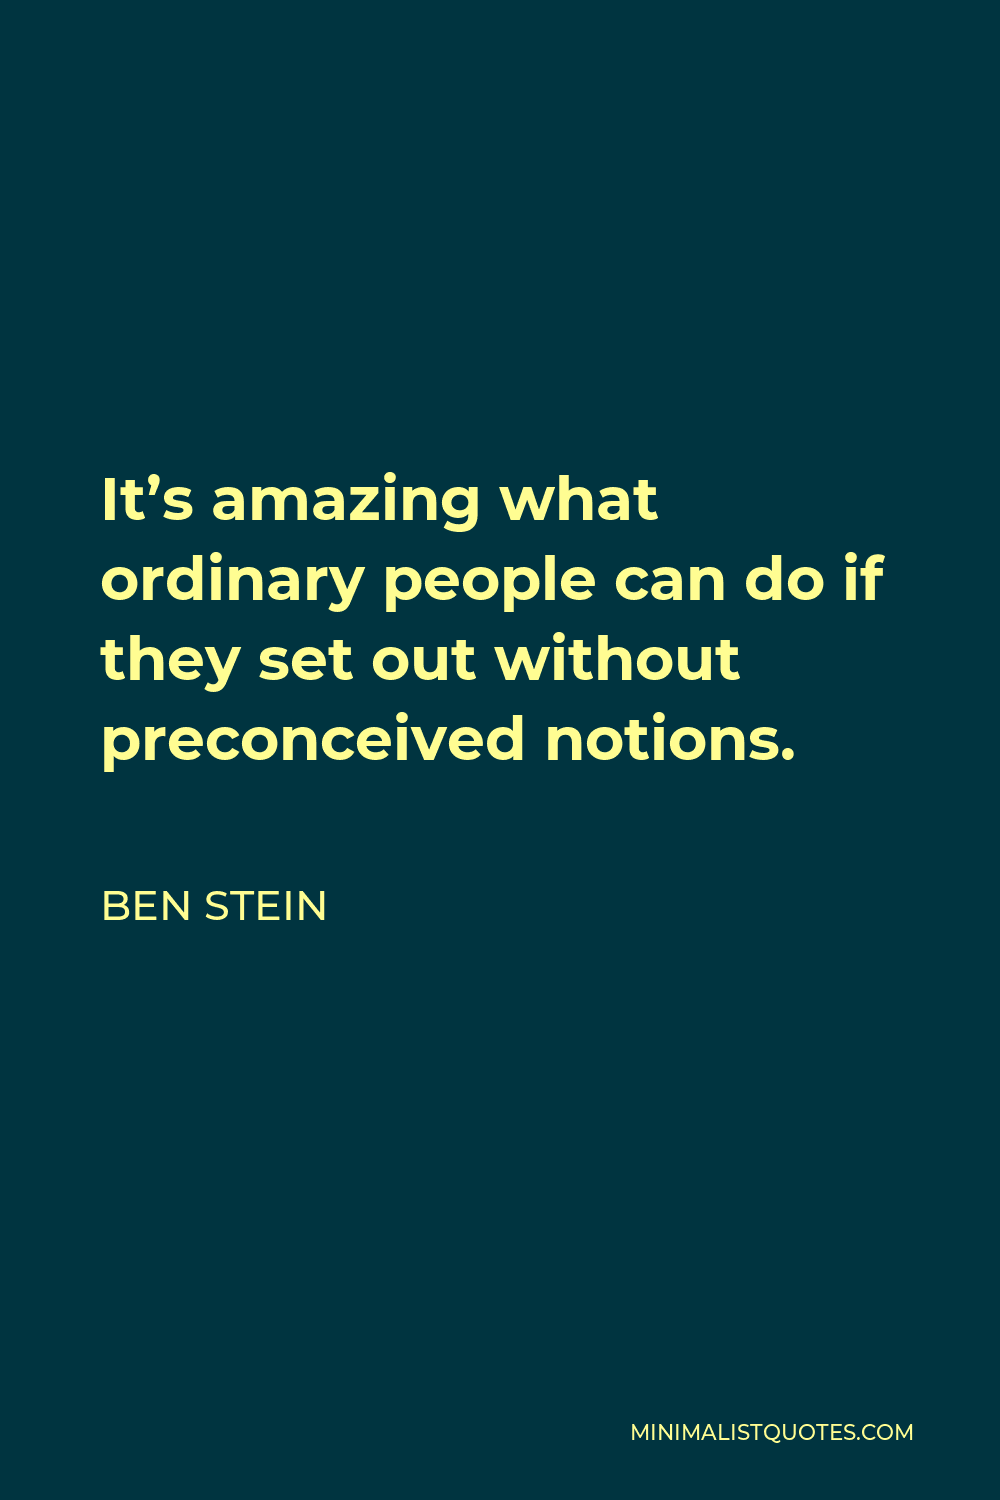 Ben Stein Quote - It’s amazing what ordinary people can do if they set out without preconceived notions.